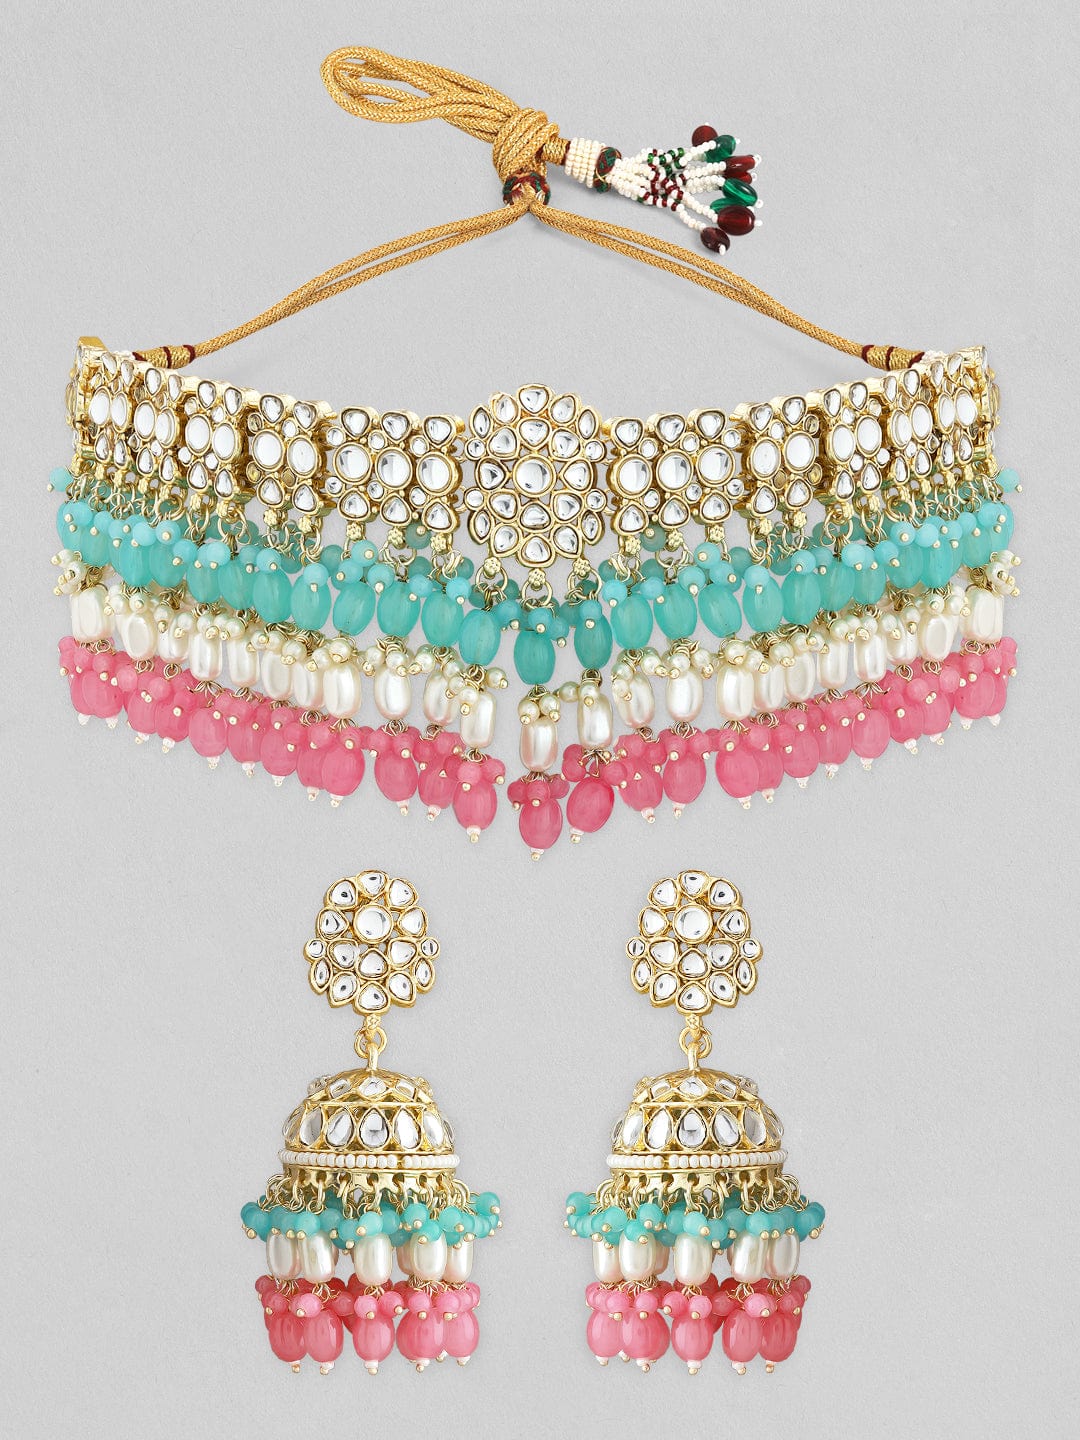 Rubans Kundan Necklace Set With Pink And Green Beads And Jhumki Earrings. Necklace Set